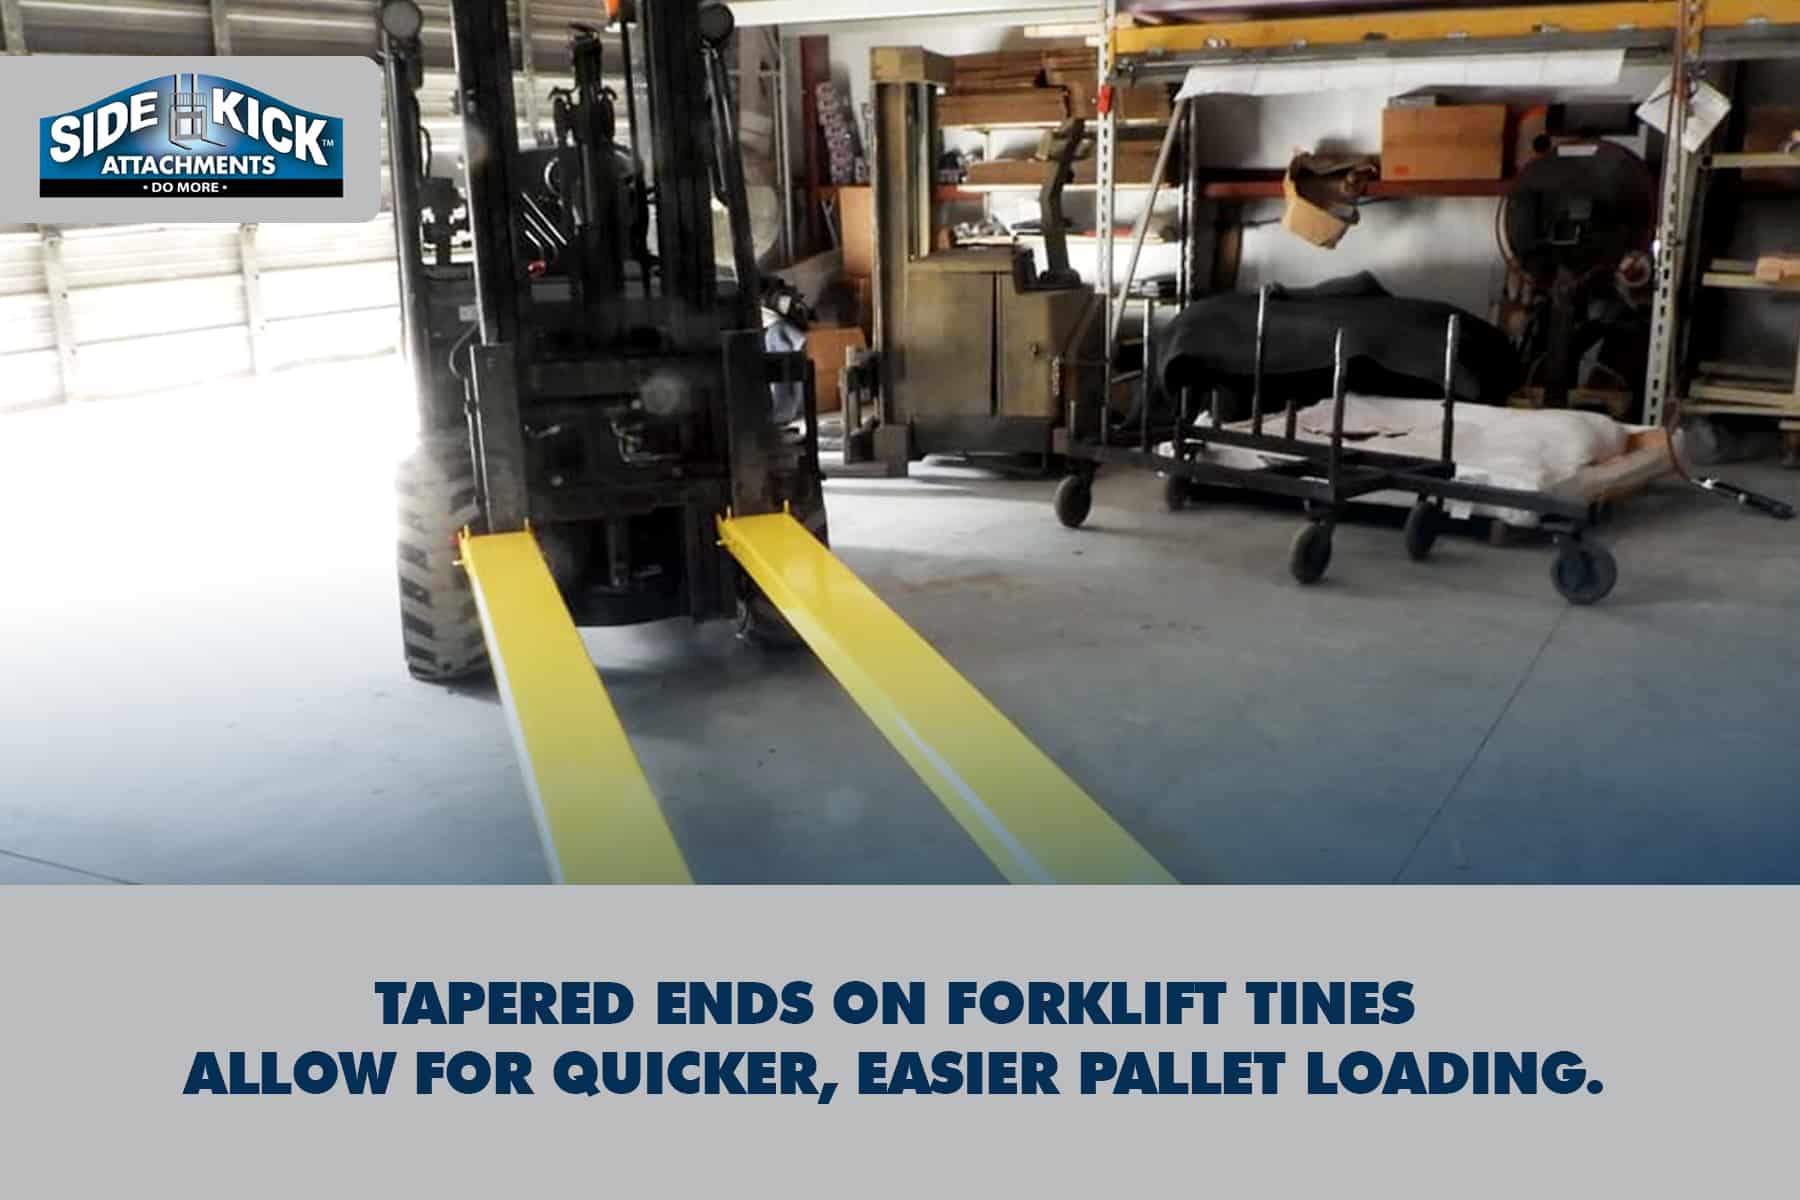 tapered ends on forklift tines allow for quicker, easier pallet loading